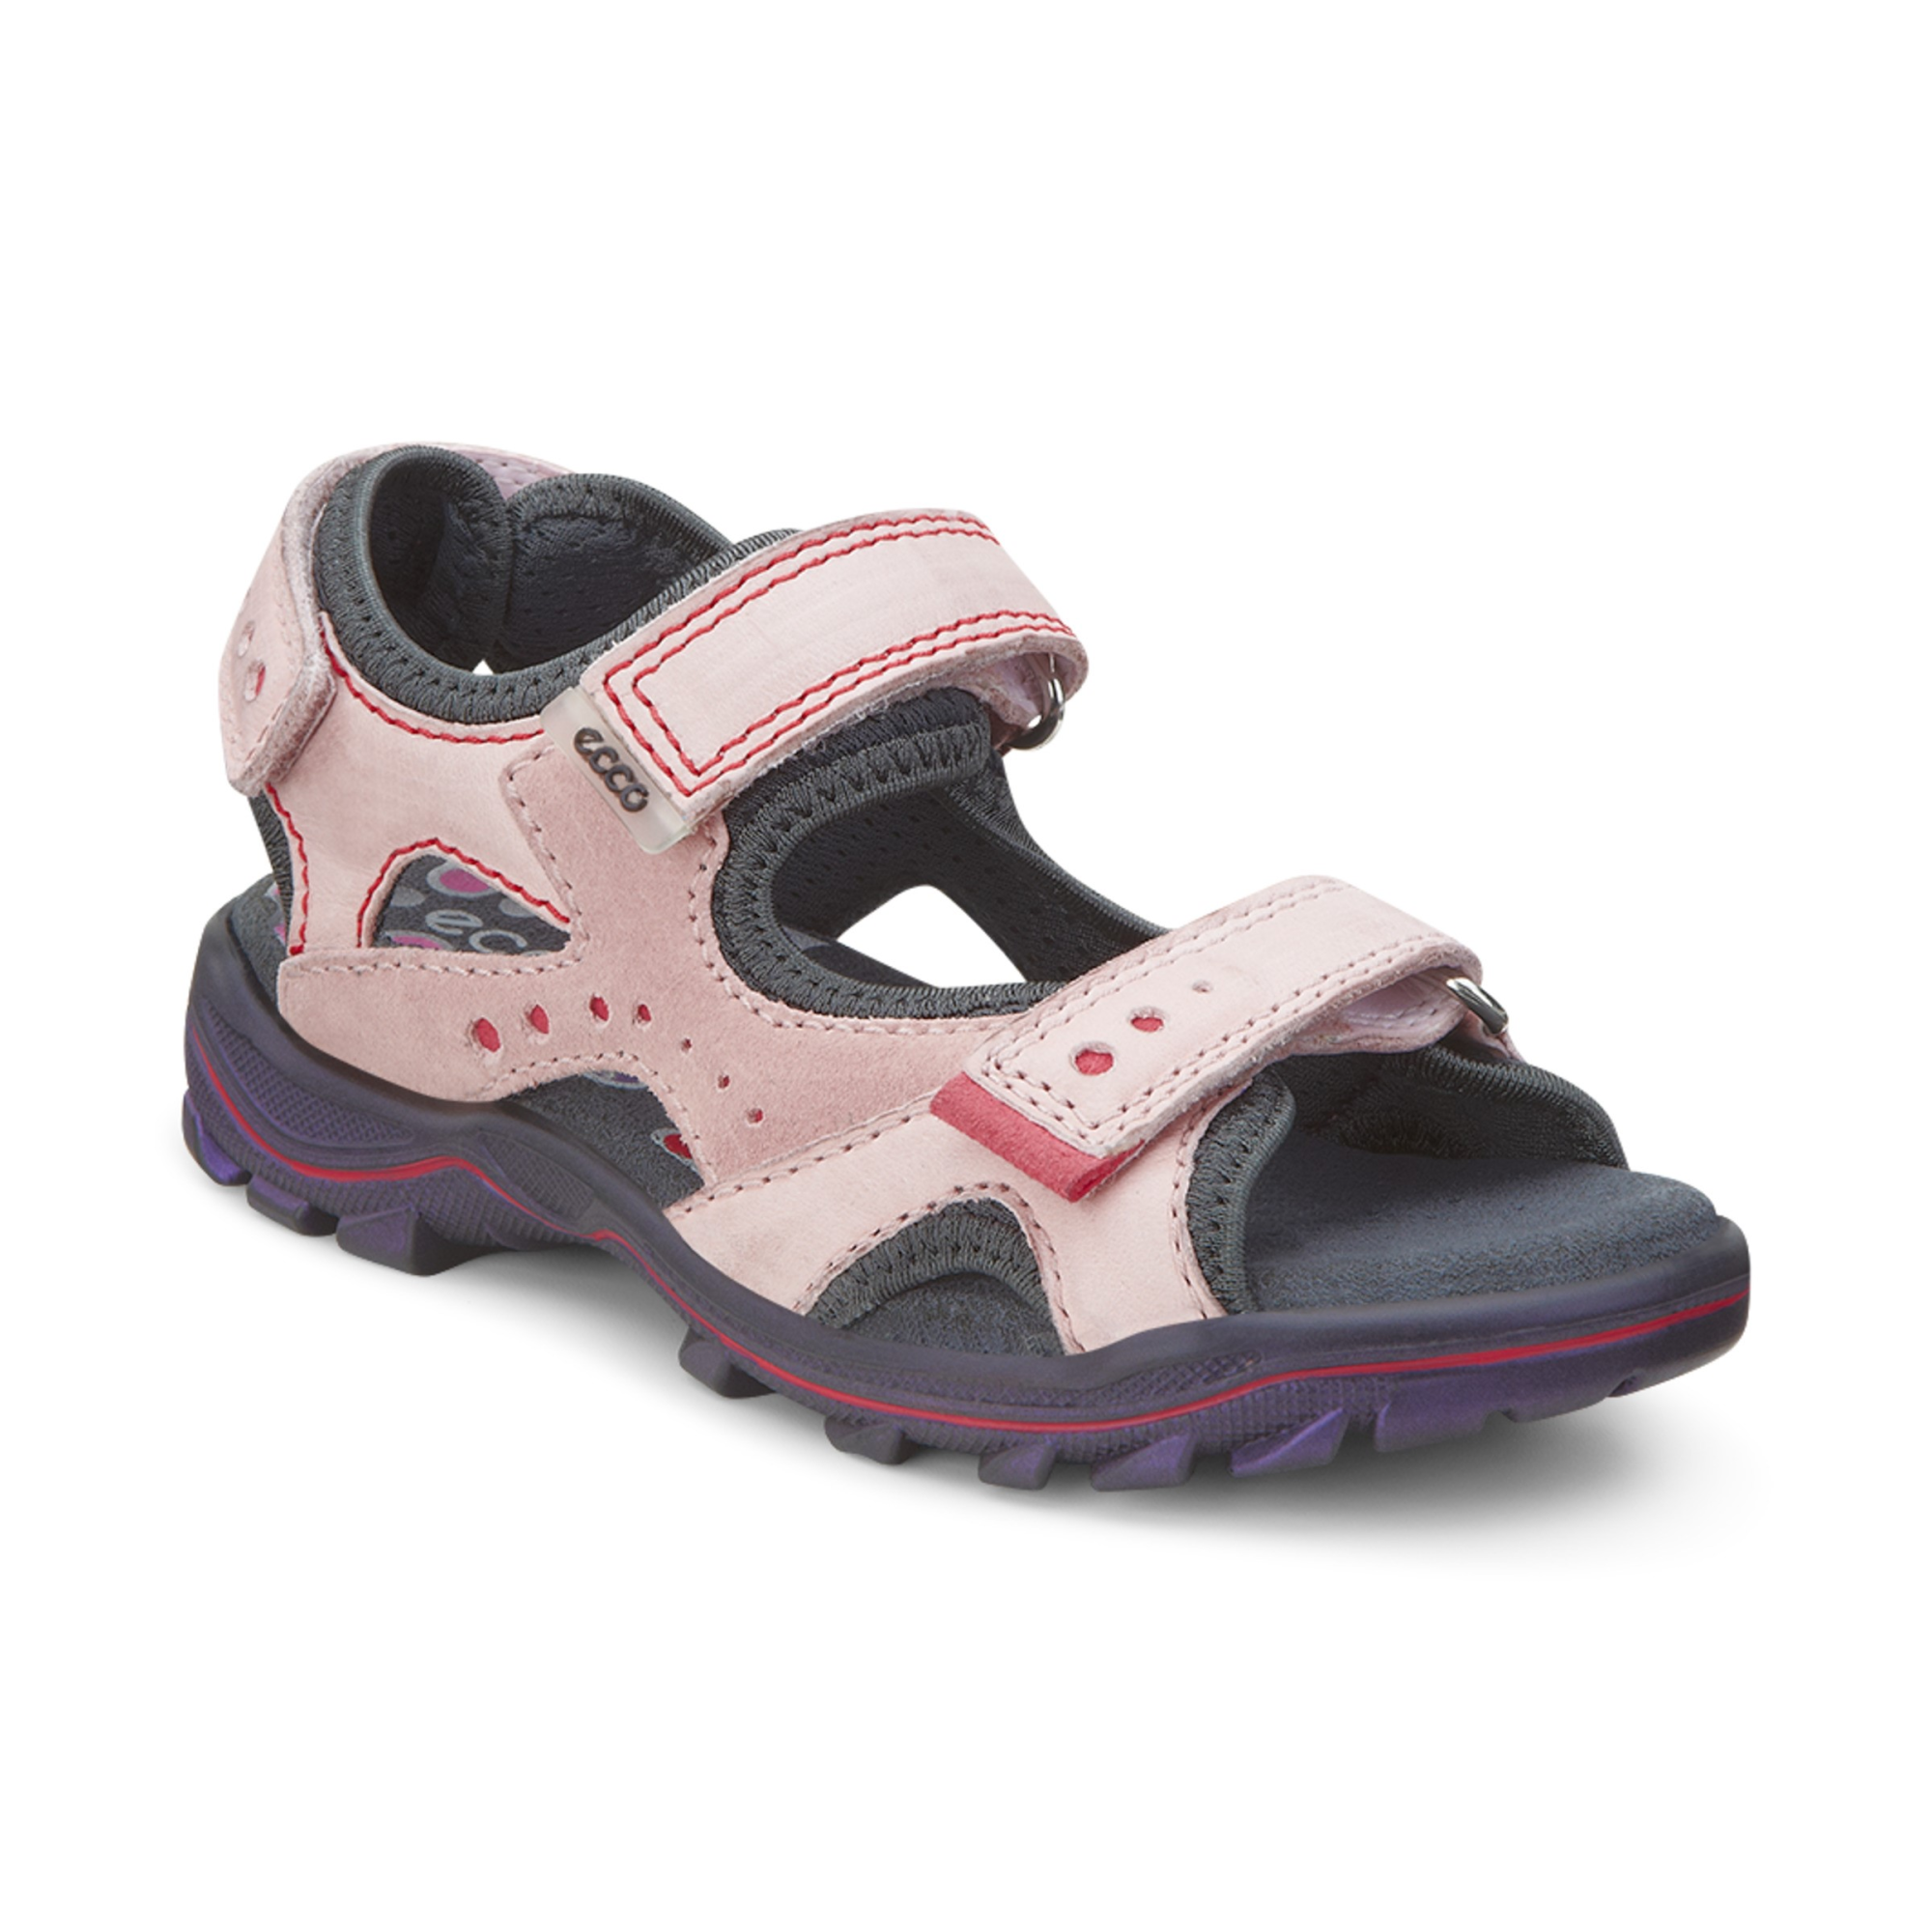 Urban Safari Sandal 33 - Products - Veryk Mall - Veryk Mall, many quick response, safe your